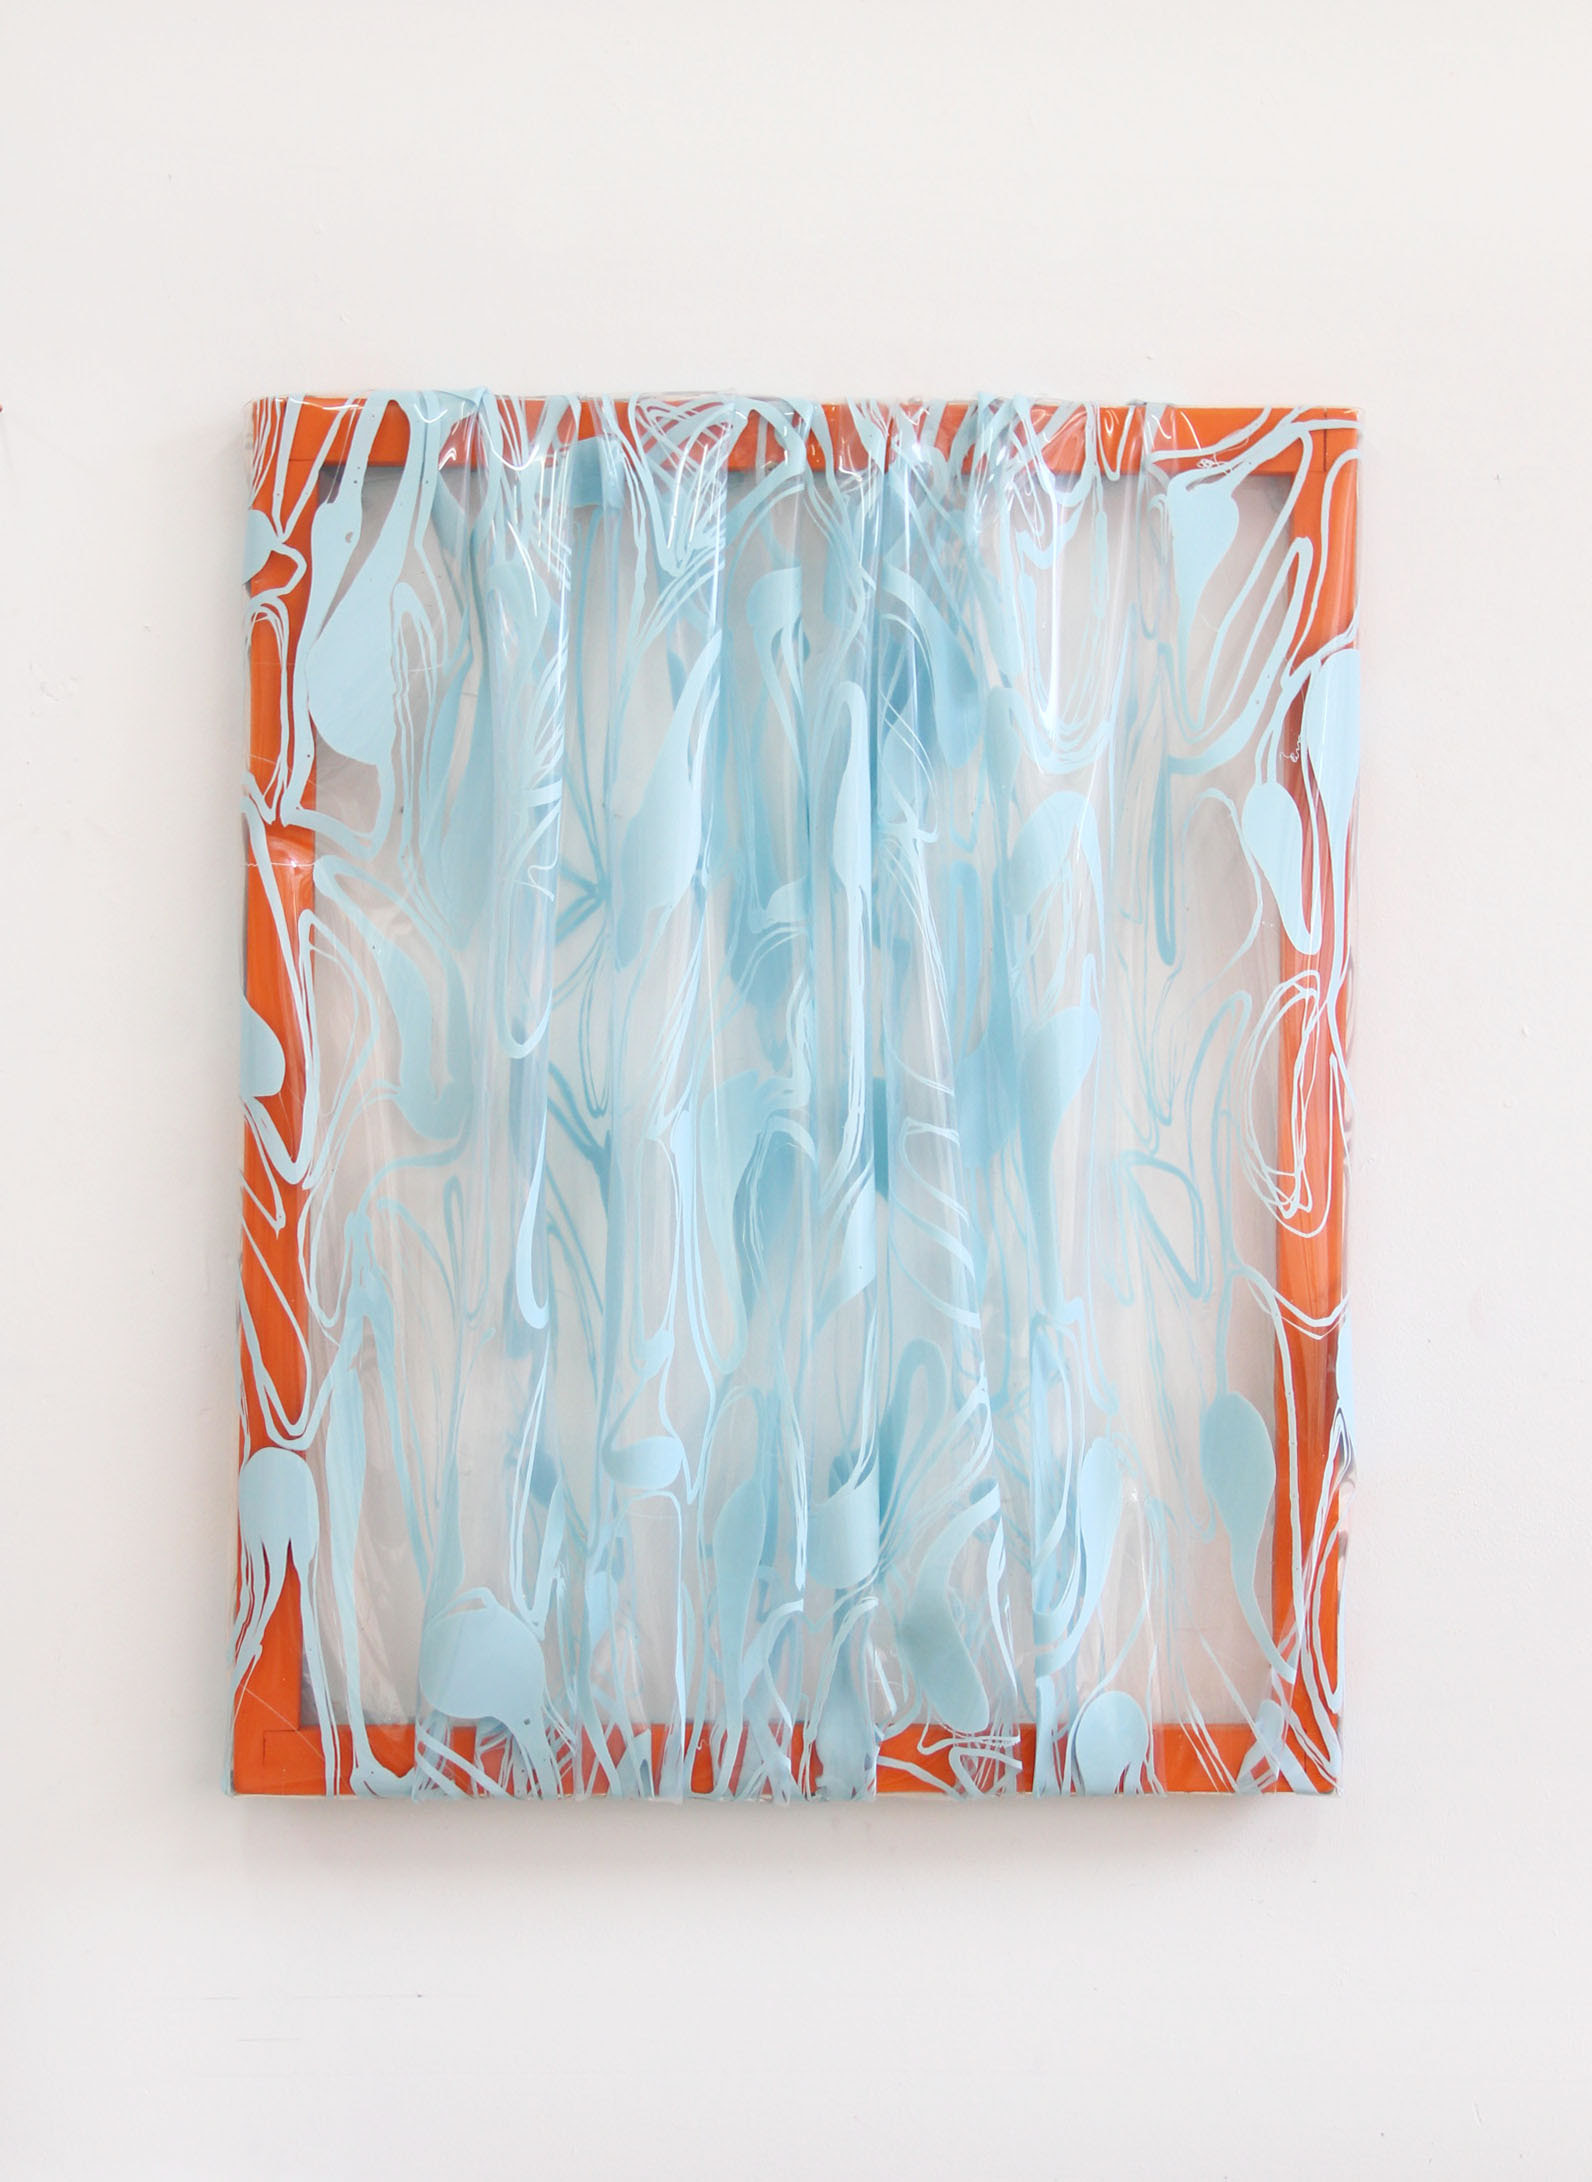 Manon Steyart, "Blurred painting I" - 2021, 60x80, silicone, spray paint and pigment 